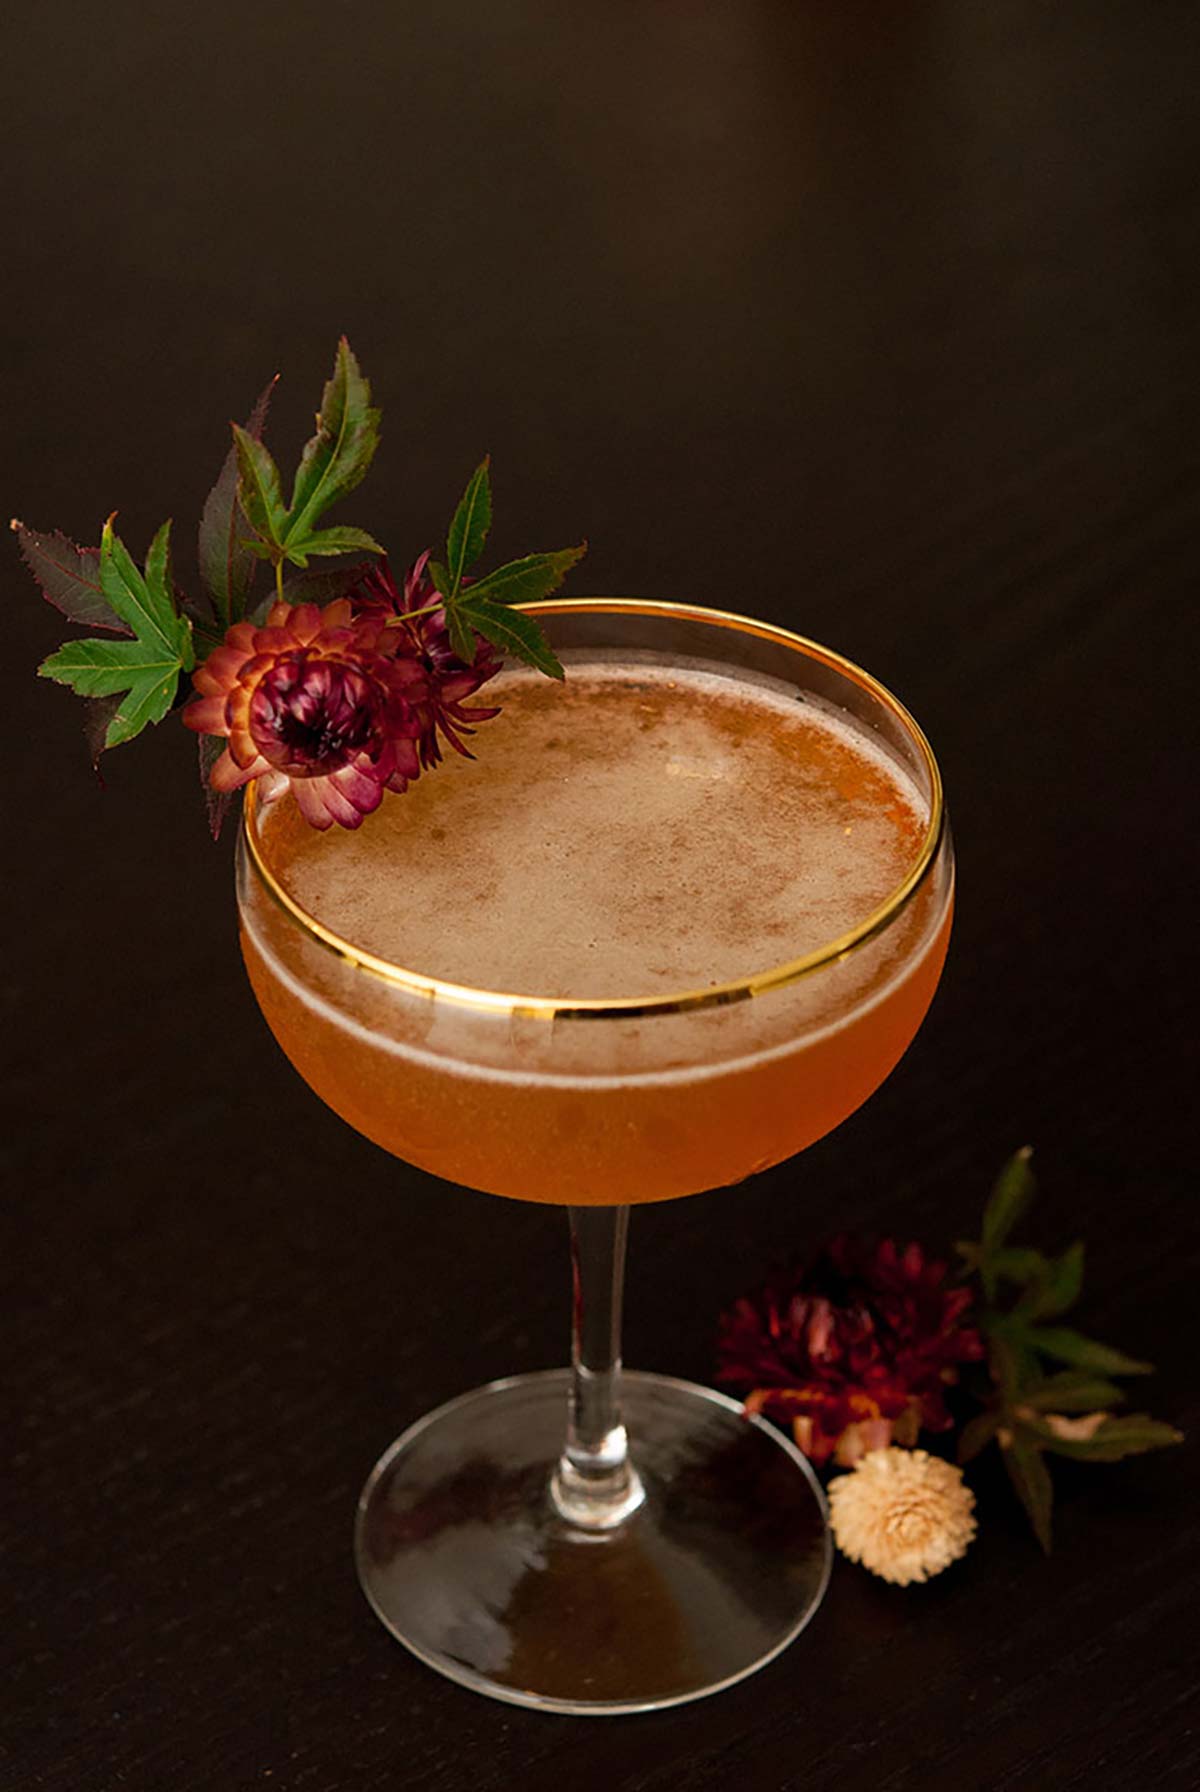 An orange cocktail in a gold-rimmed glass, garnished with a dry flower with leaves on a black table.